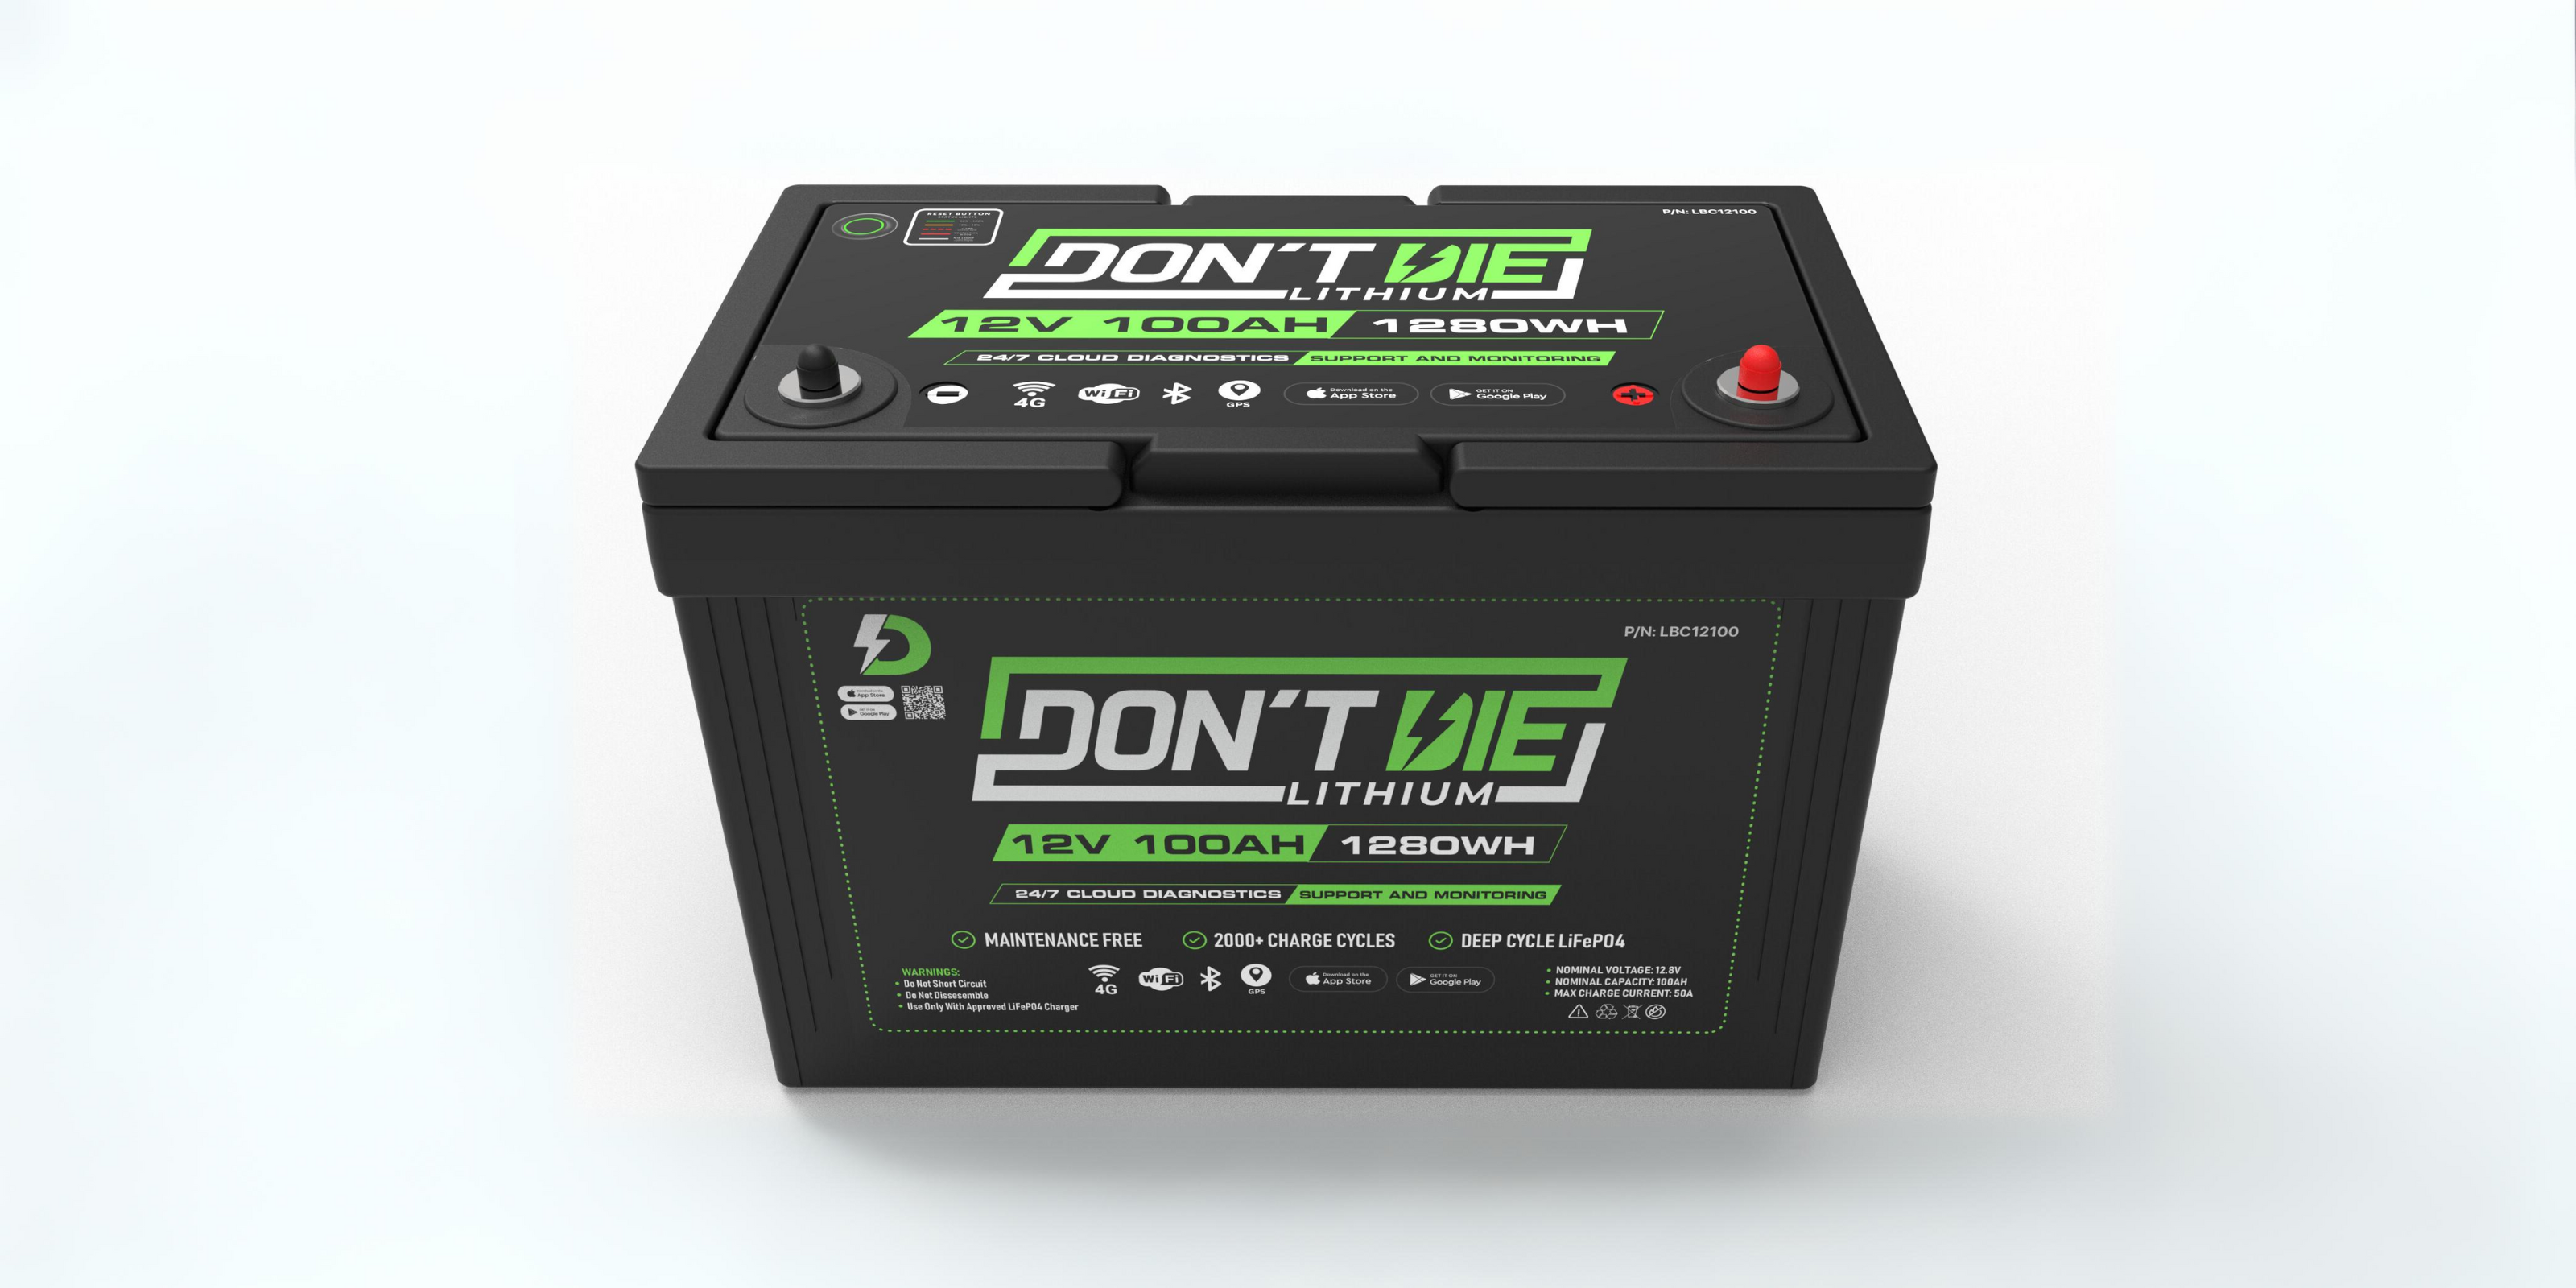 12V Lithium Ion Battery, efficient compact source for portable power, outlined in precise detail for easy identification.